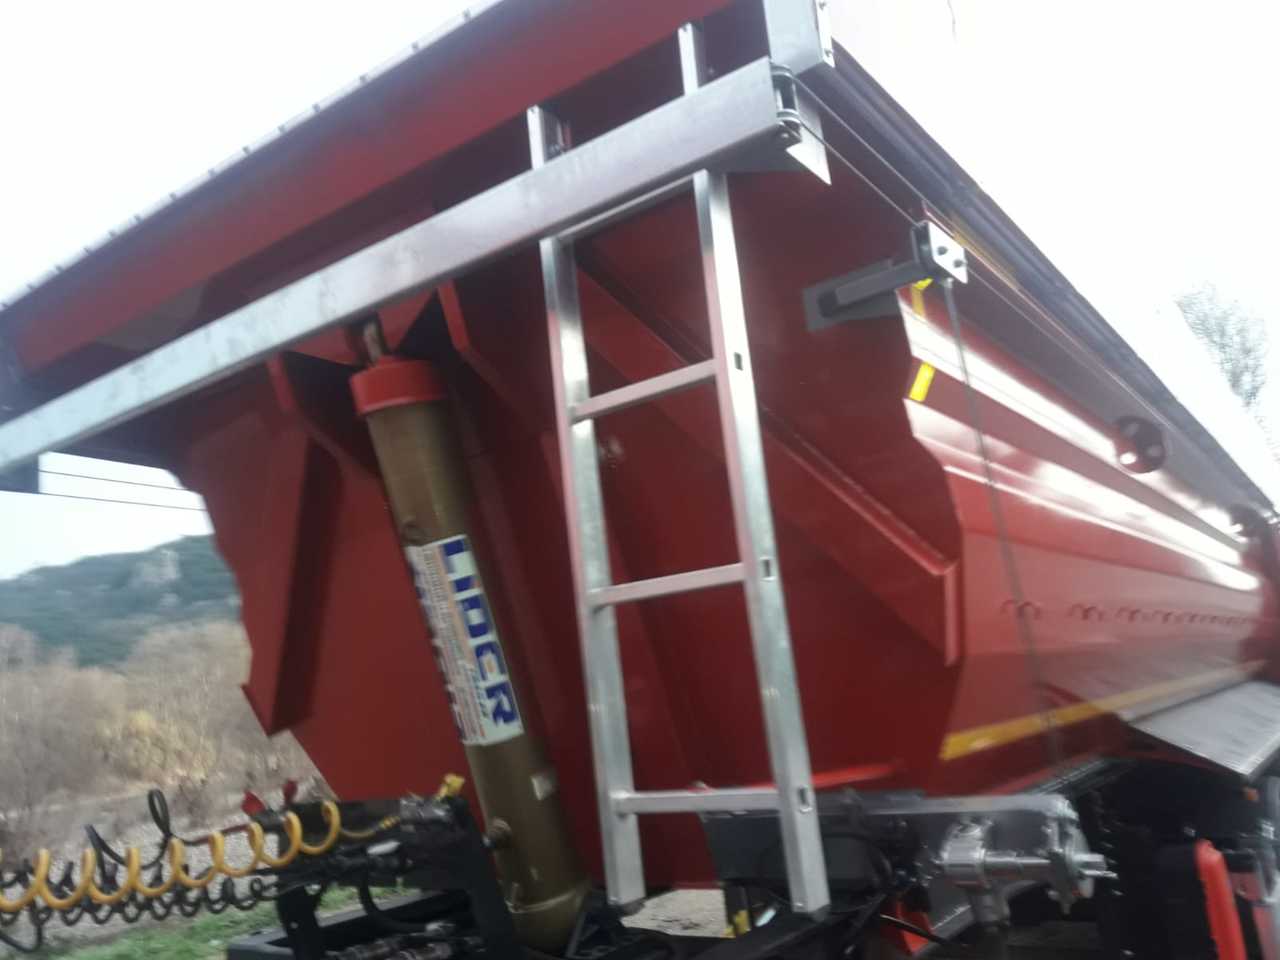 Lease a LIDER 2022 MODELS YEAR NEW (MANUFACTURER COMPANY LIDER TRAILER & TANKER LIDER 2022 MODELS YEAR NEW (MANUFACTURER COMPANY LIDER TRAILER & TANKER: picture 2